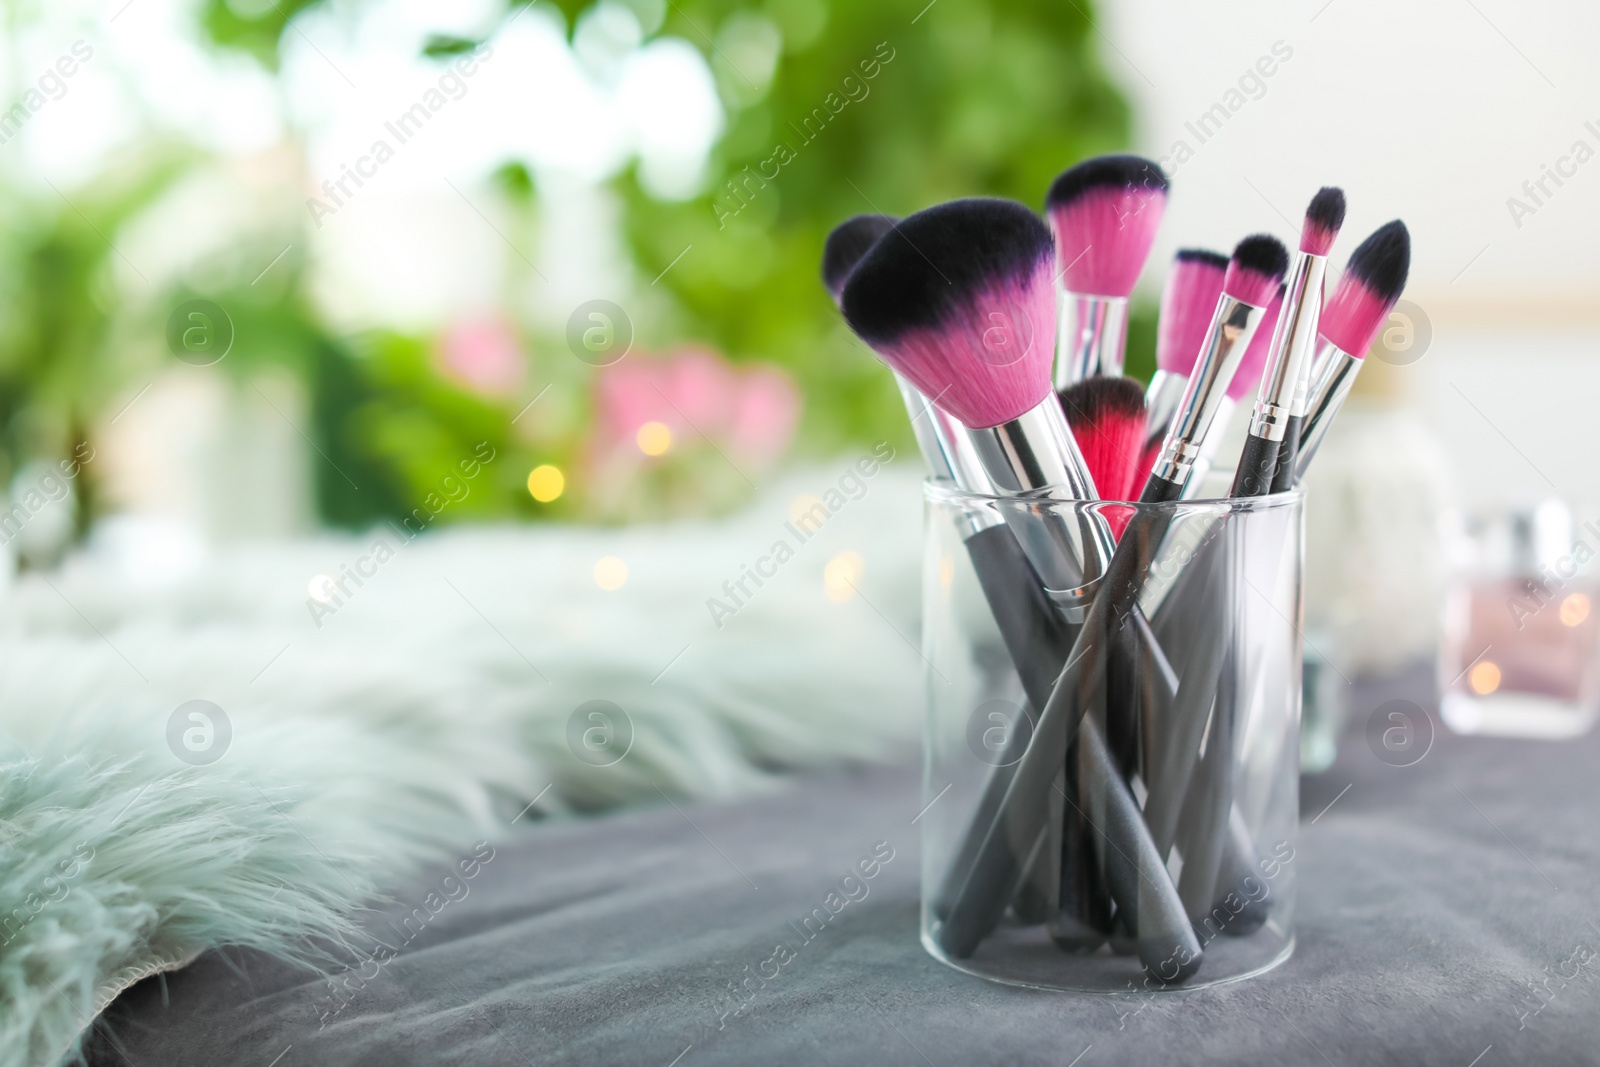 Photo of Makeup brushes in holder on blurred background